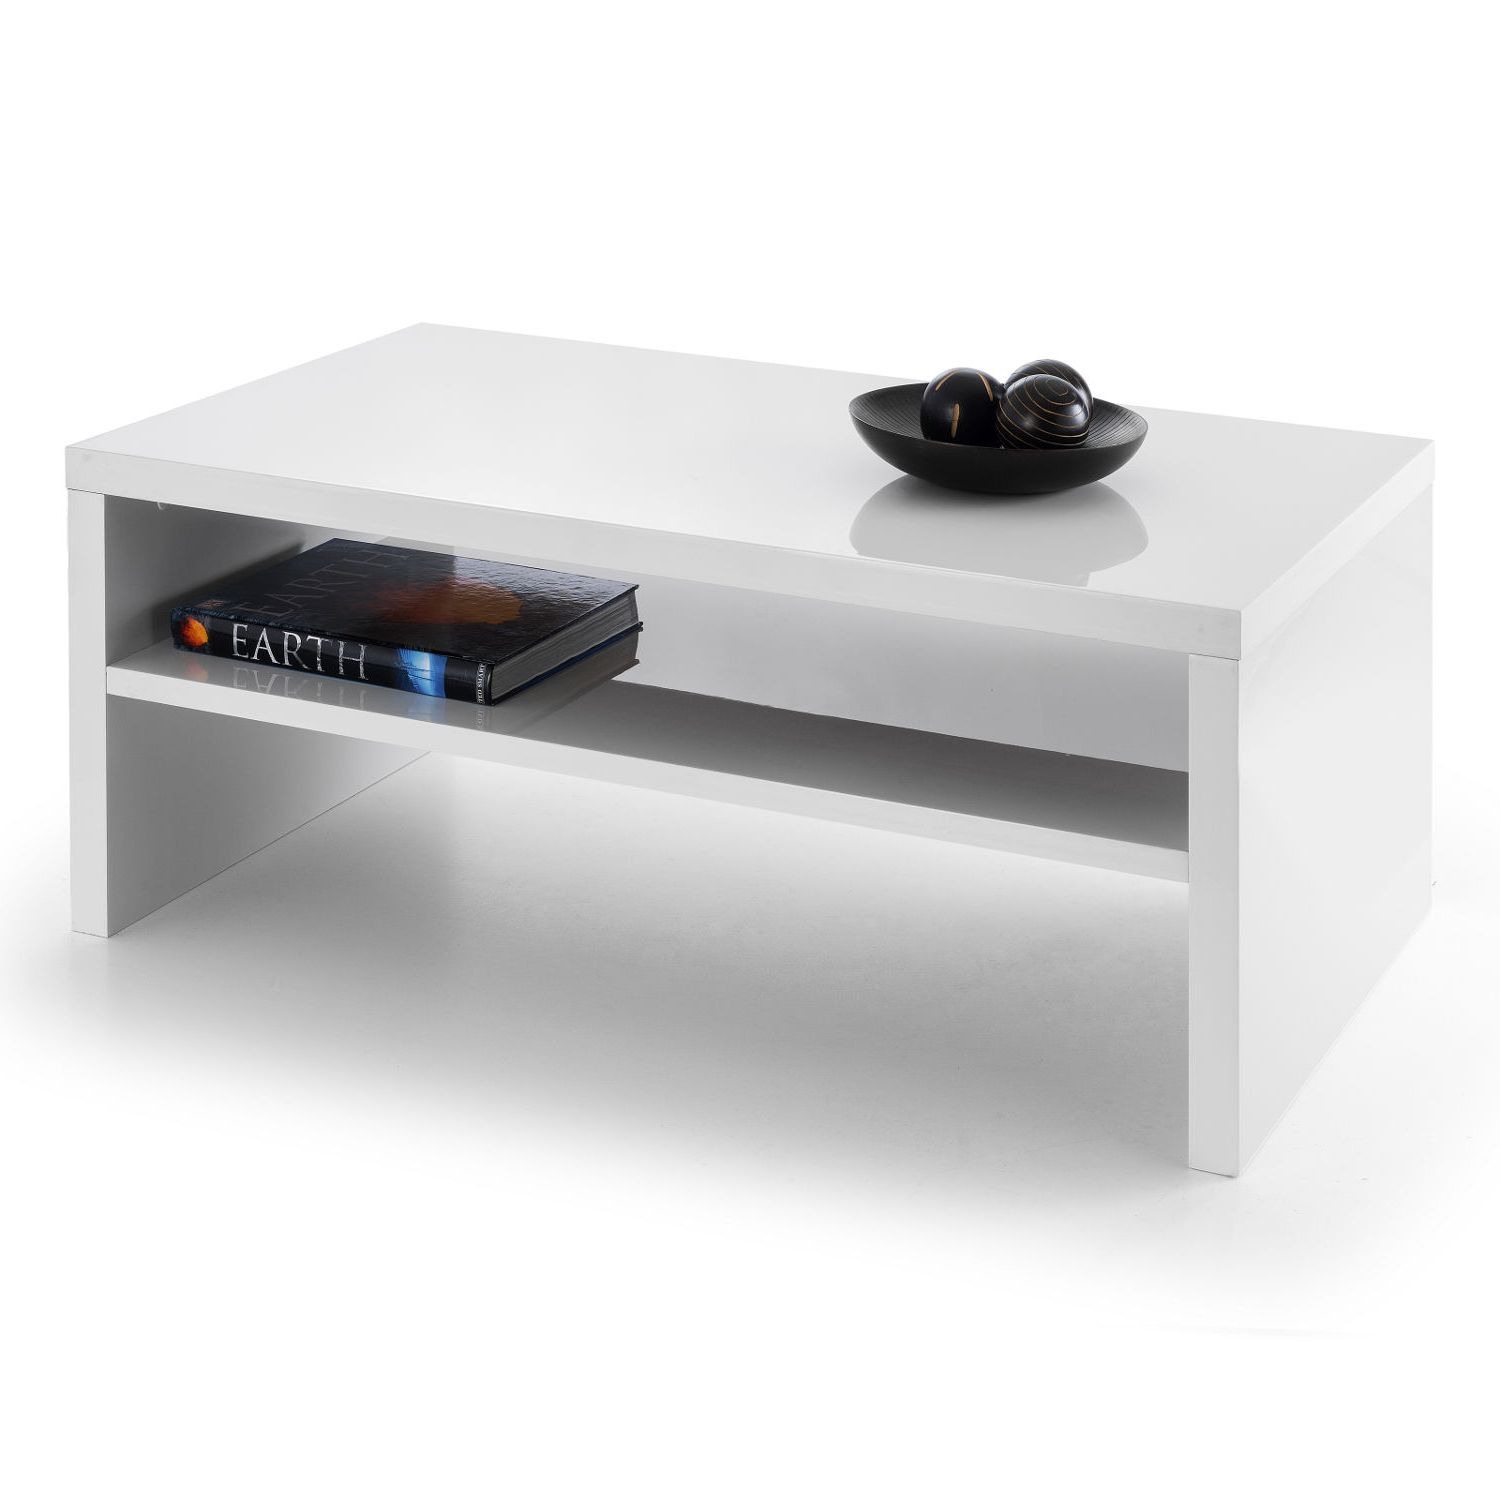 Preferred 10 Grey High Gloss Coffee Table Inspiration Throughout White Gloss And Maple Cream Coffee Tables (View 8 of 20)